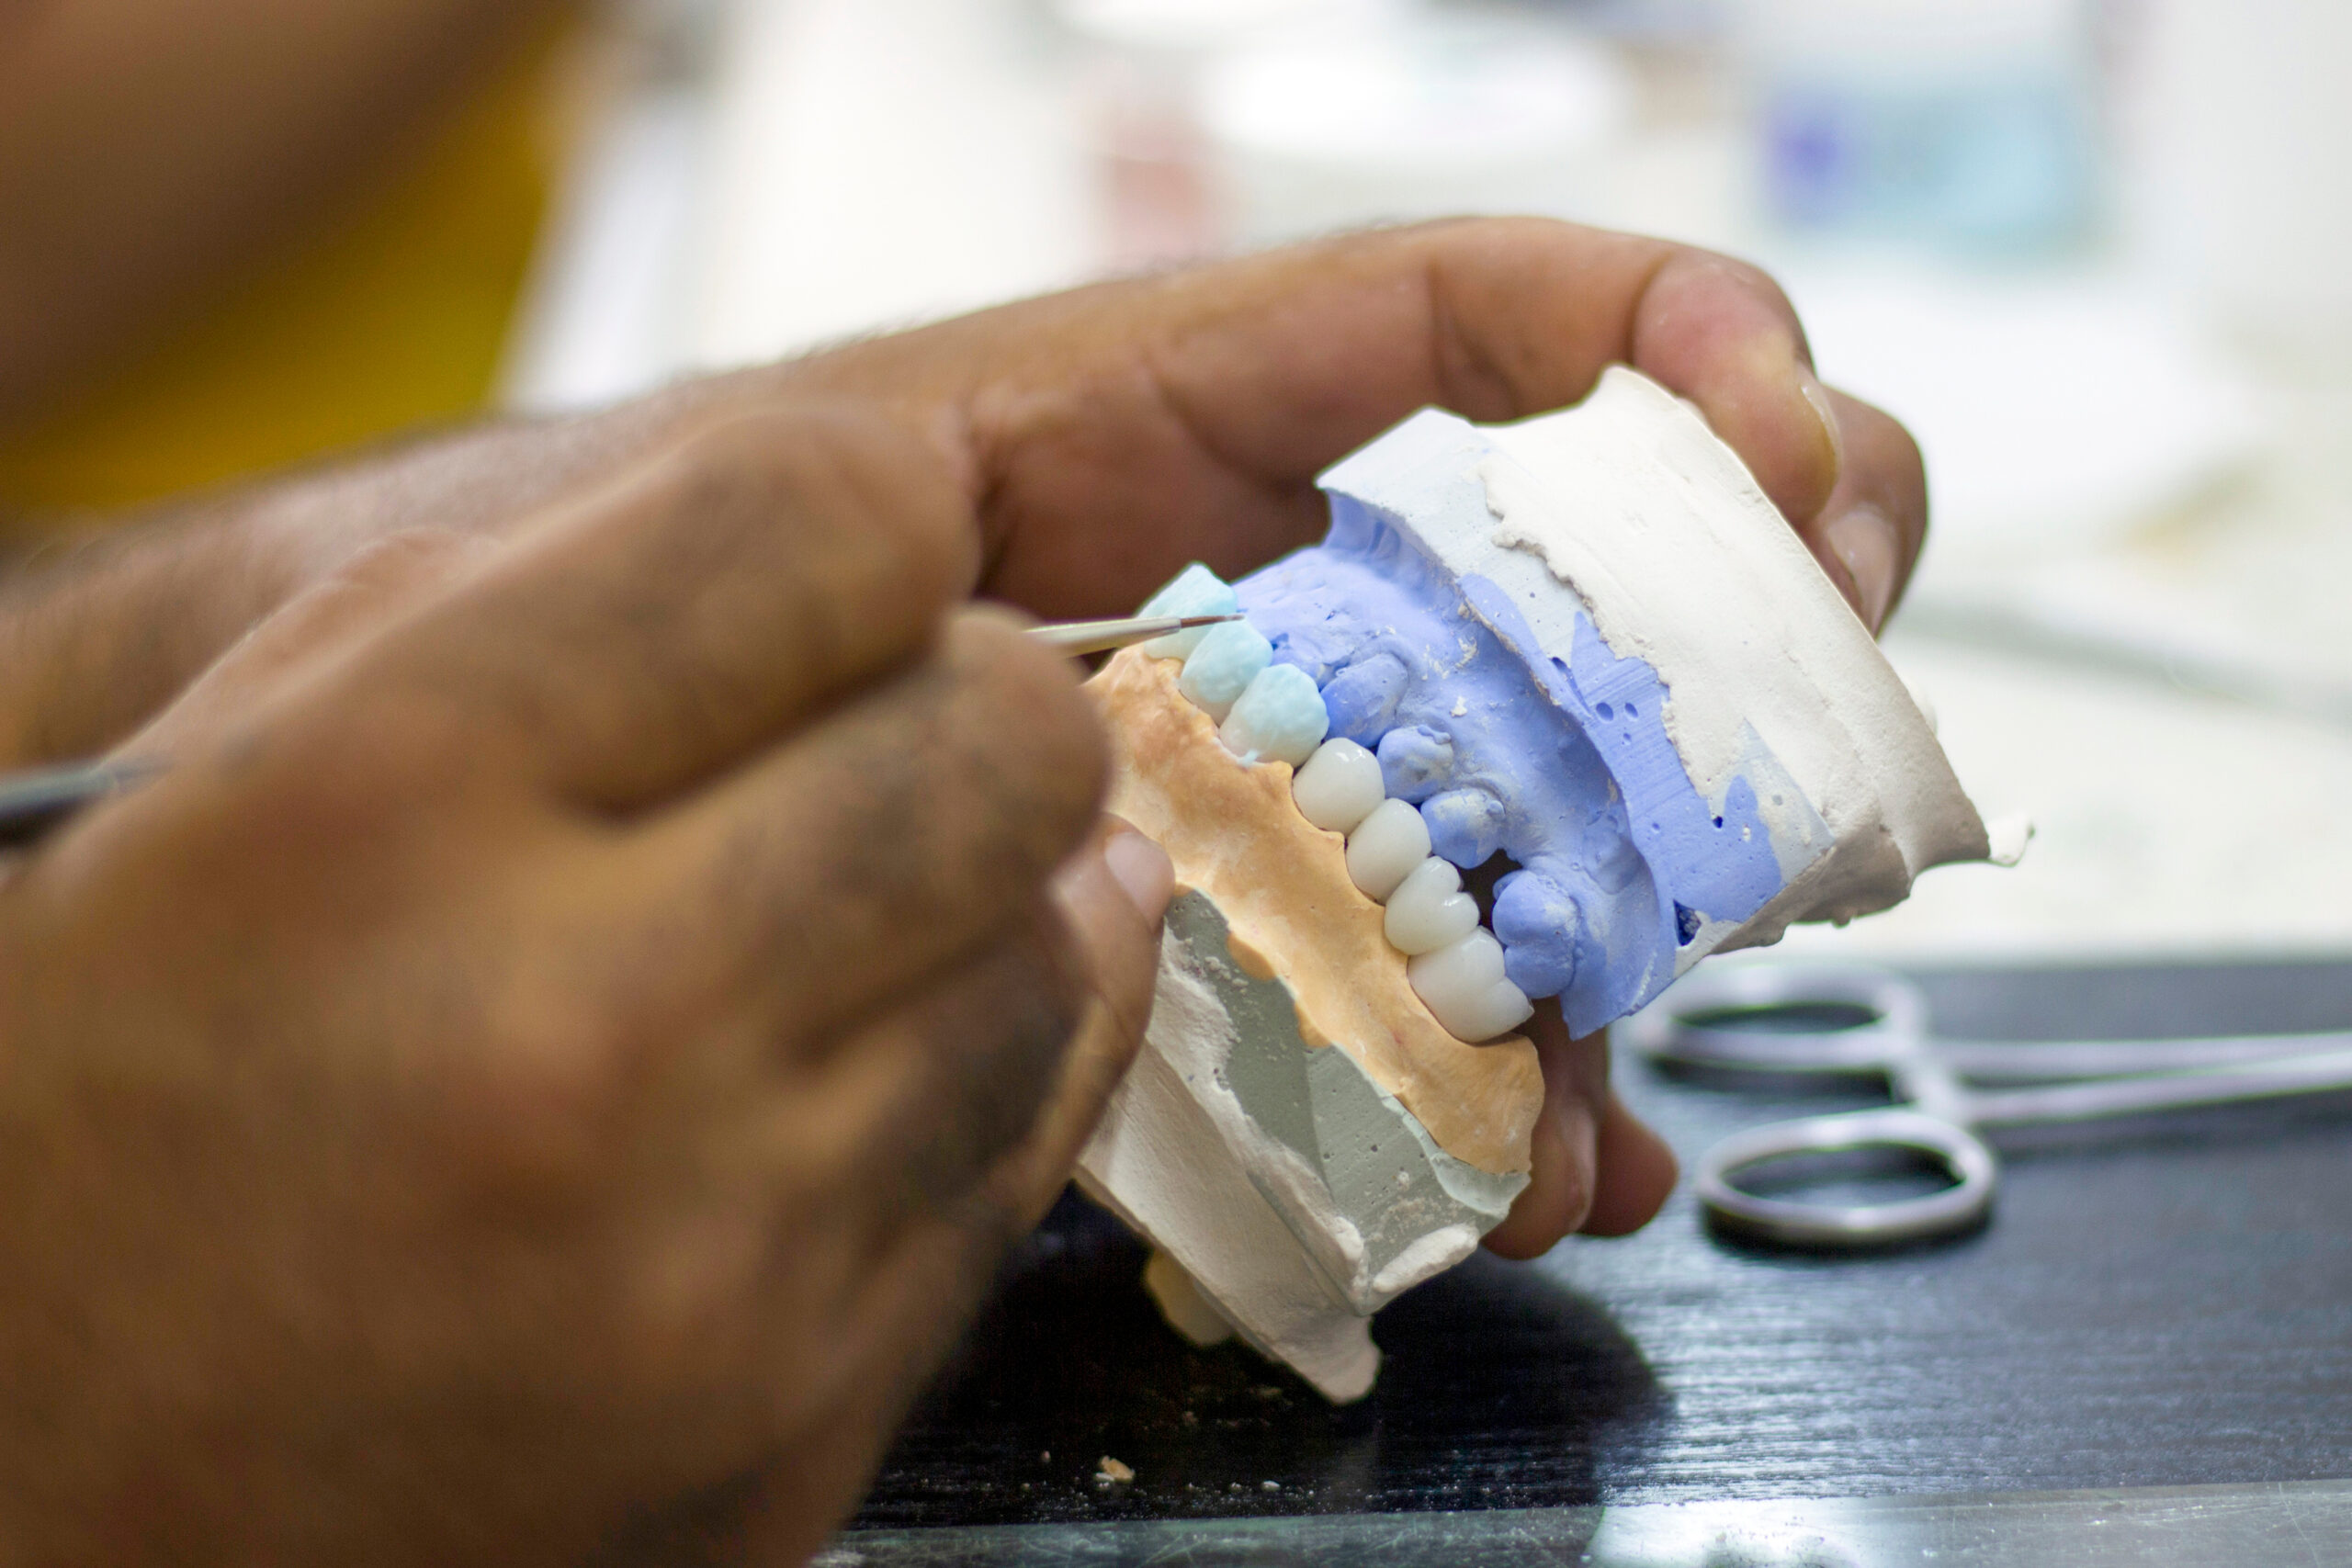 a full mouth dental implant model being worked on by a dentist.